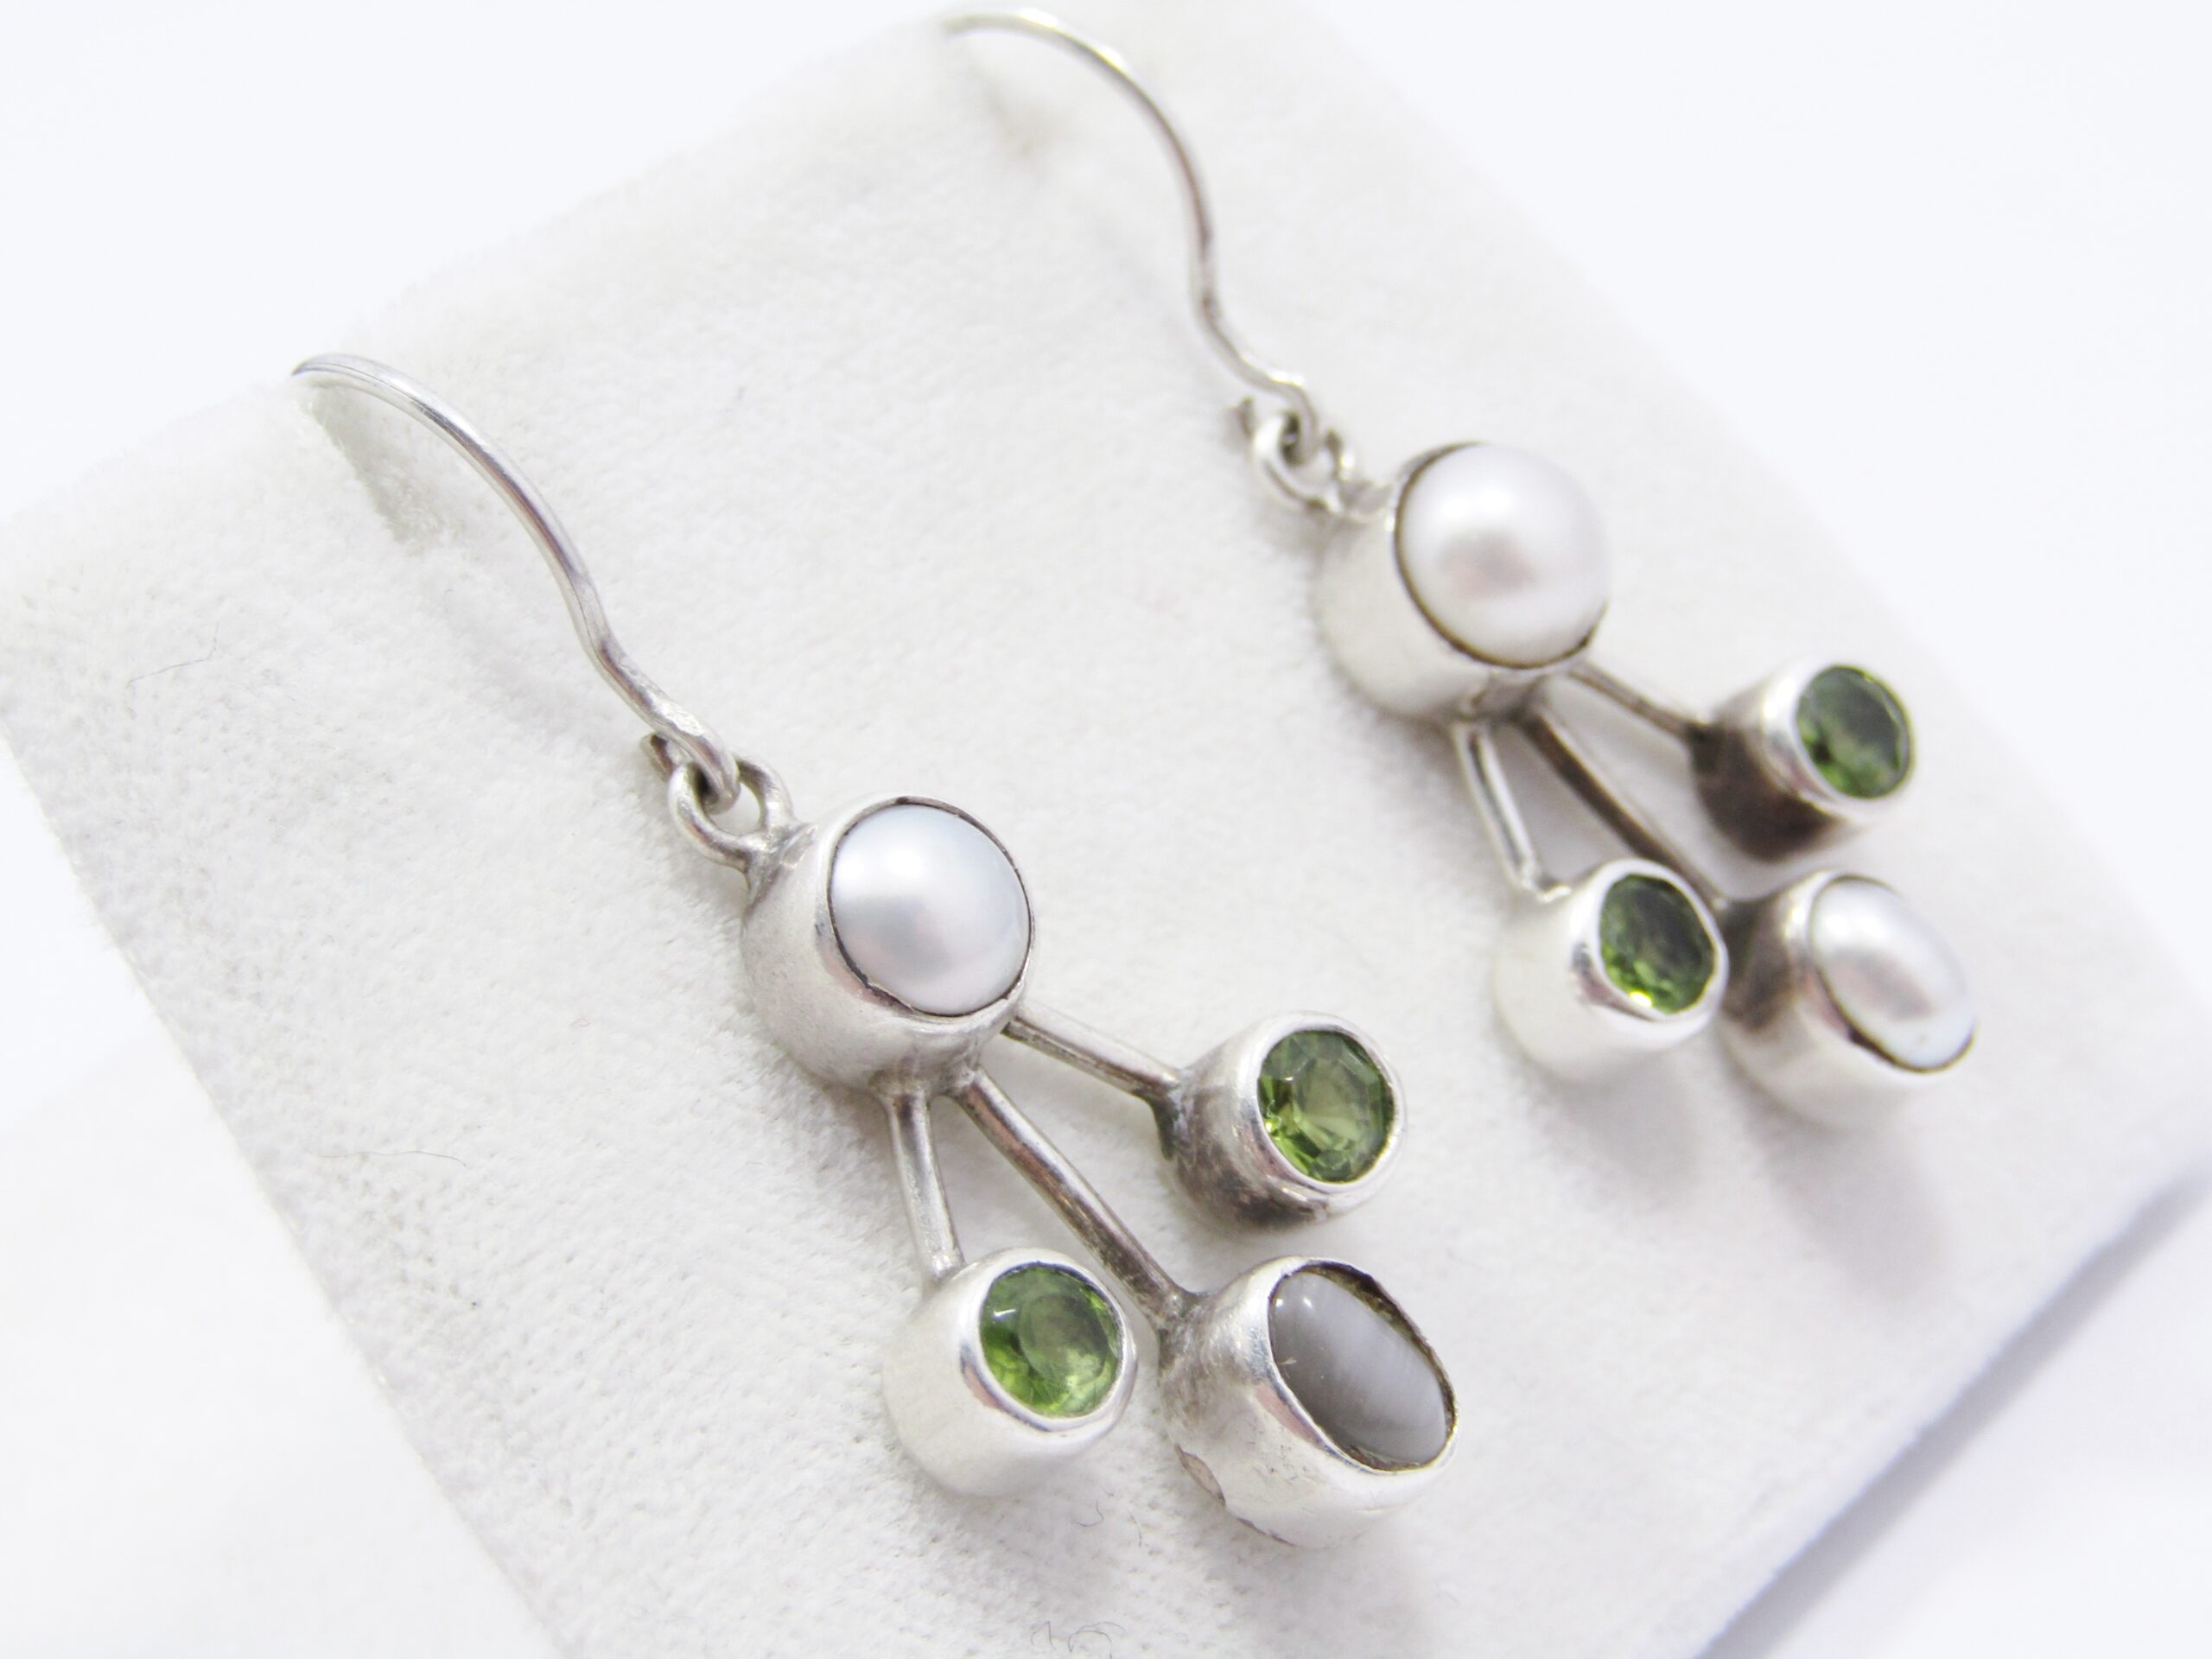 A Beautiful Pair of Peridot and Pearl Earrings in Sterling Silver.